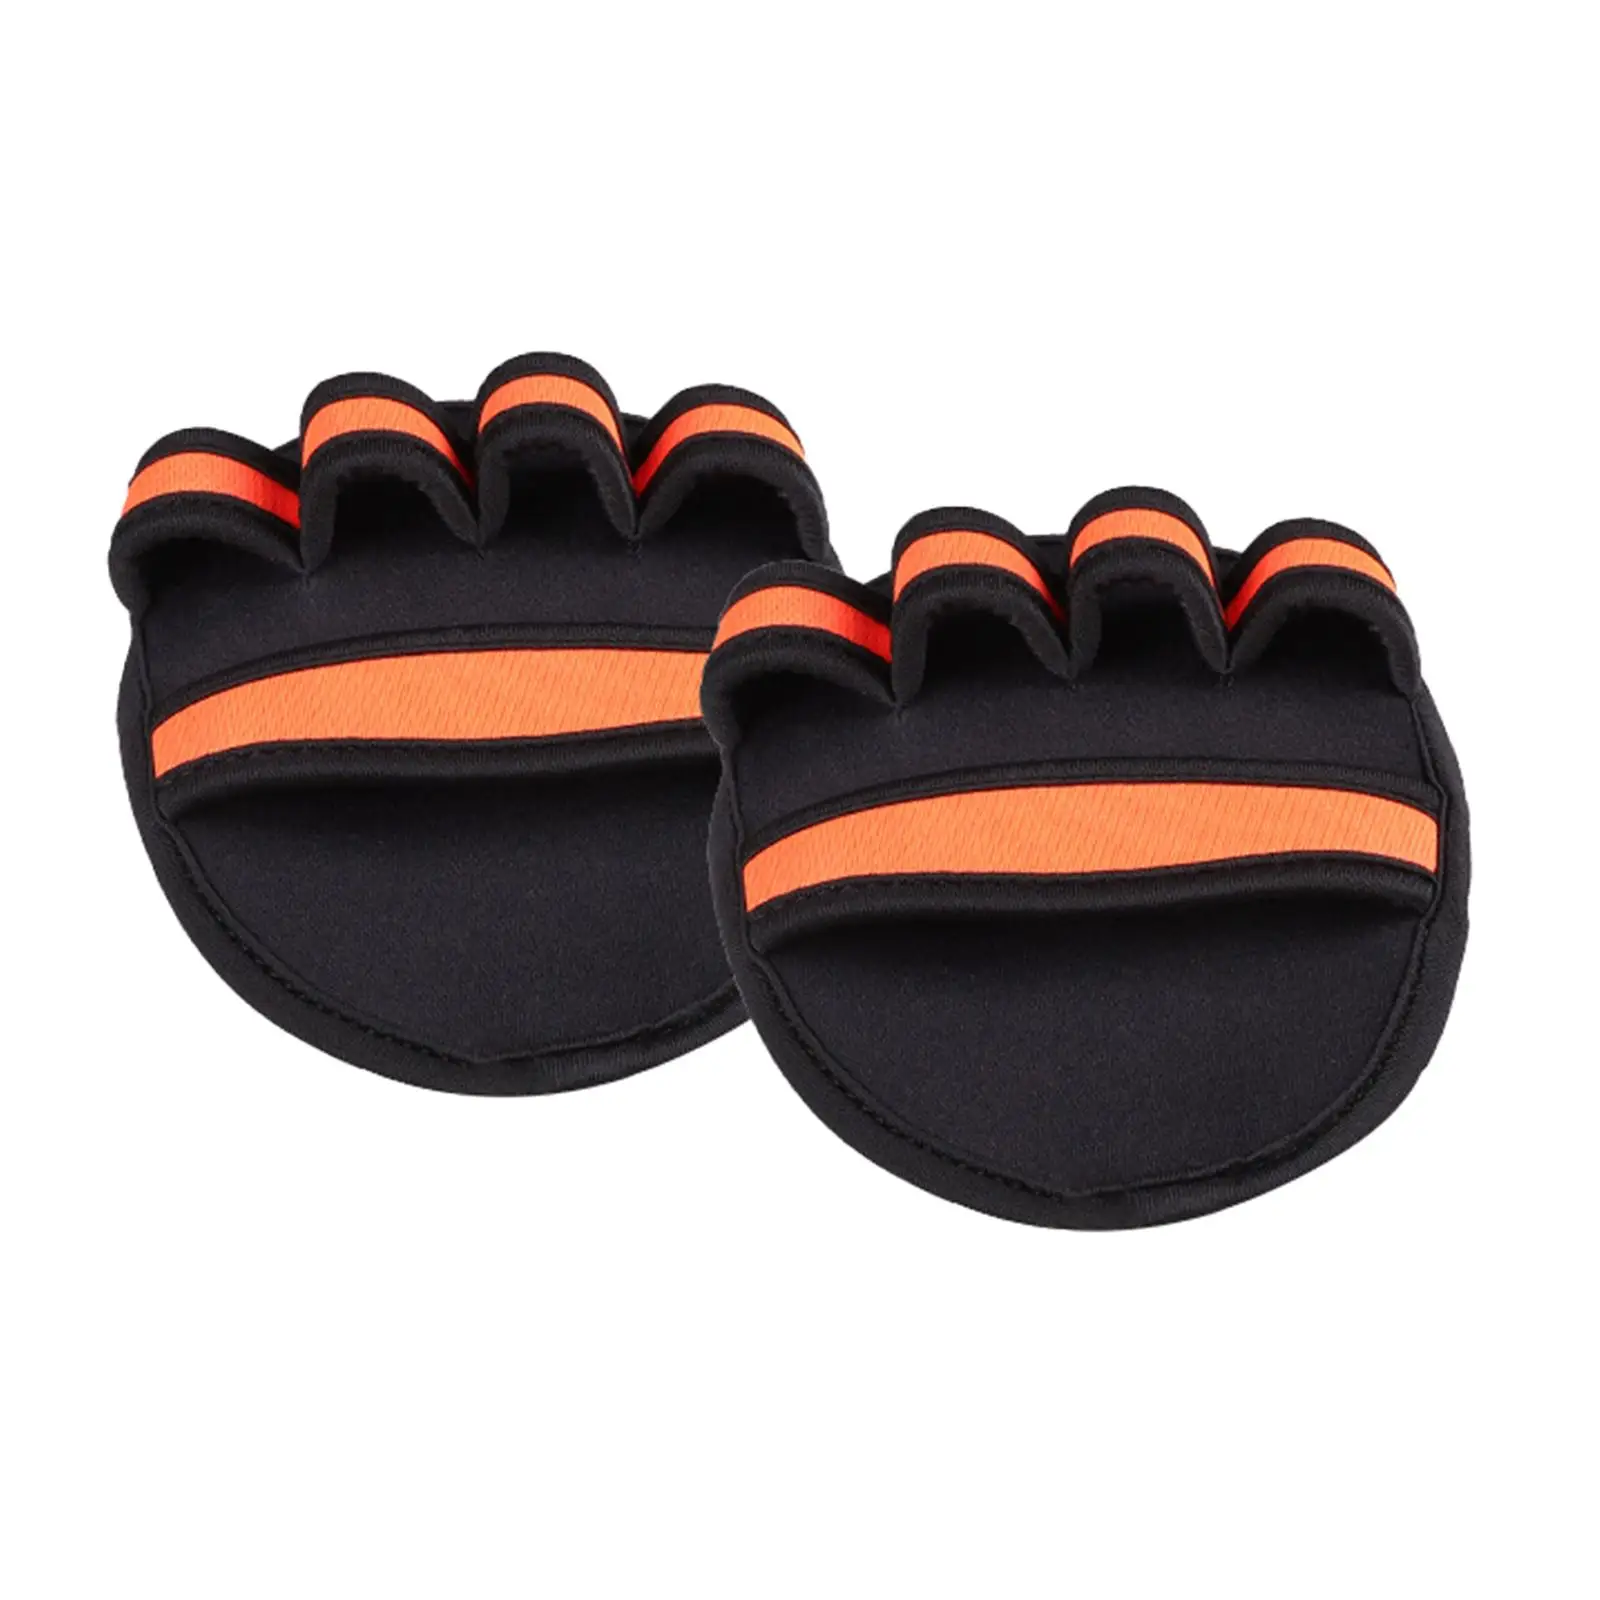 Gym Grip Pads Workout Gloves Anti Slip Gyms Exercise Gloves for Lifting Dumbbell Grips Push Ups